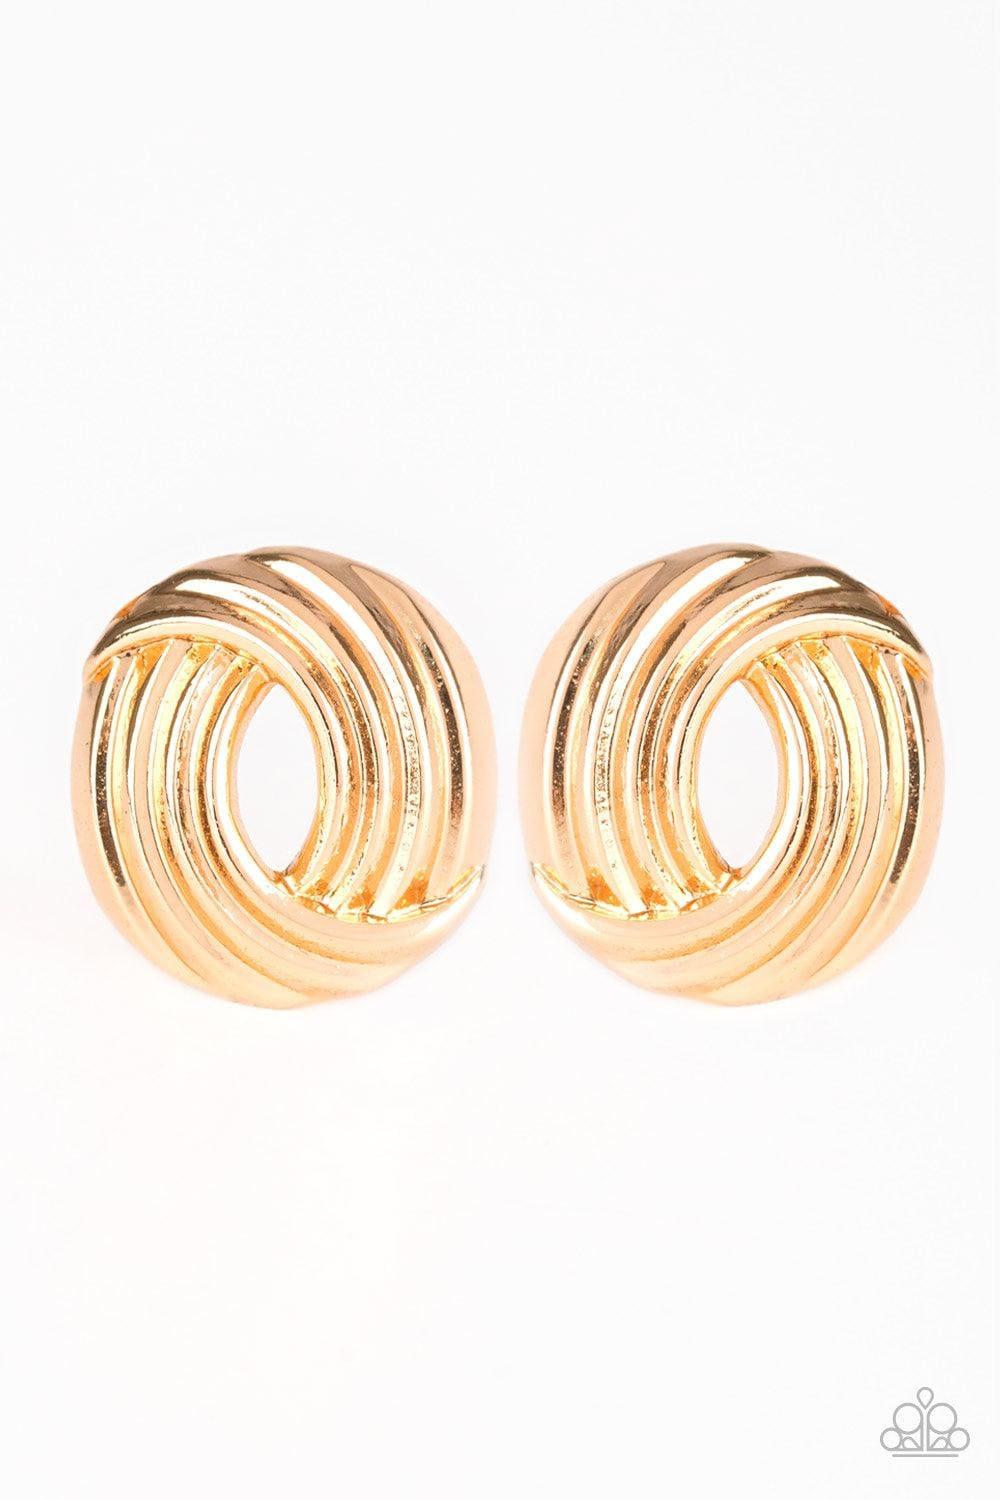 Paparazzi Accessories - Rare Refinement - Gold Post Earrings - Bling by JessieK